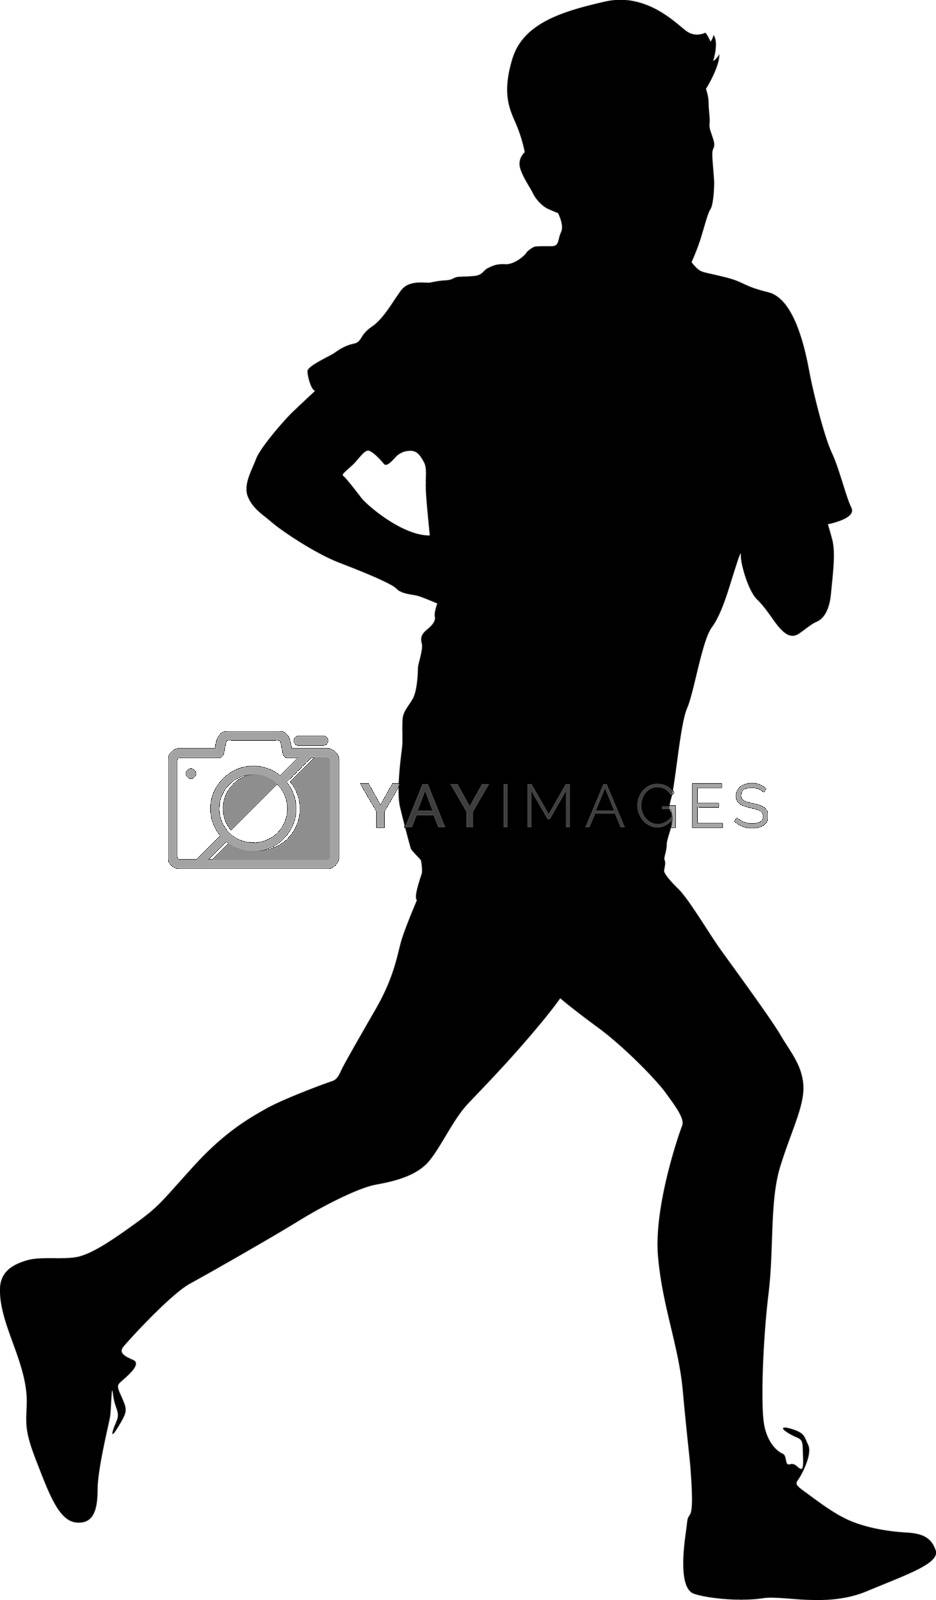 Royalty free image of Silhouettes Runners on sprint, men. vector illustration. by aarrows